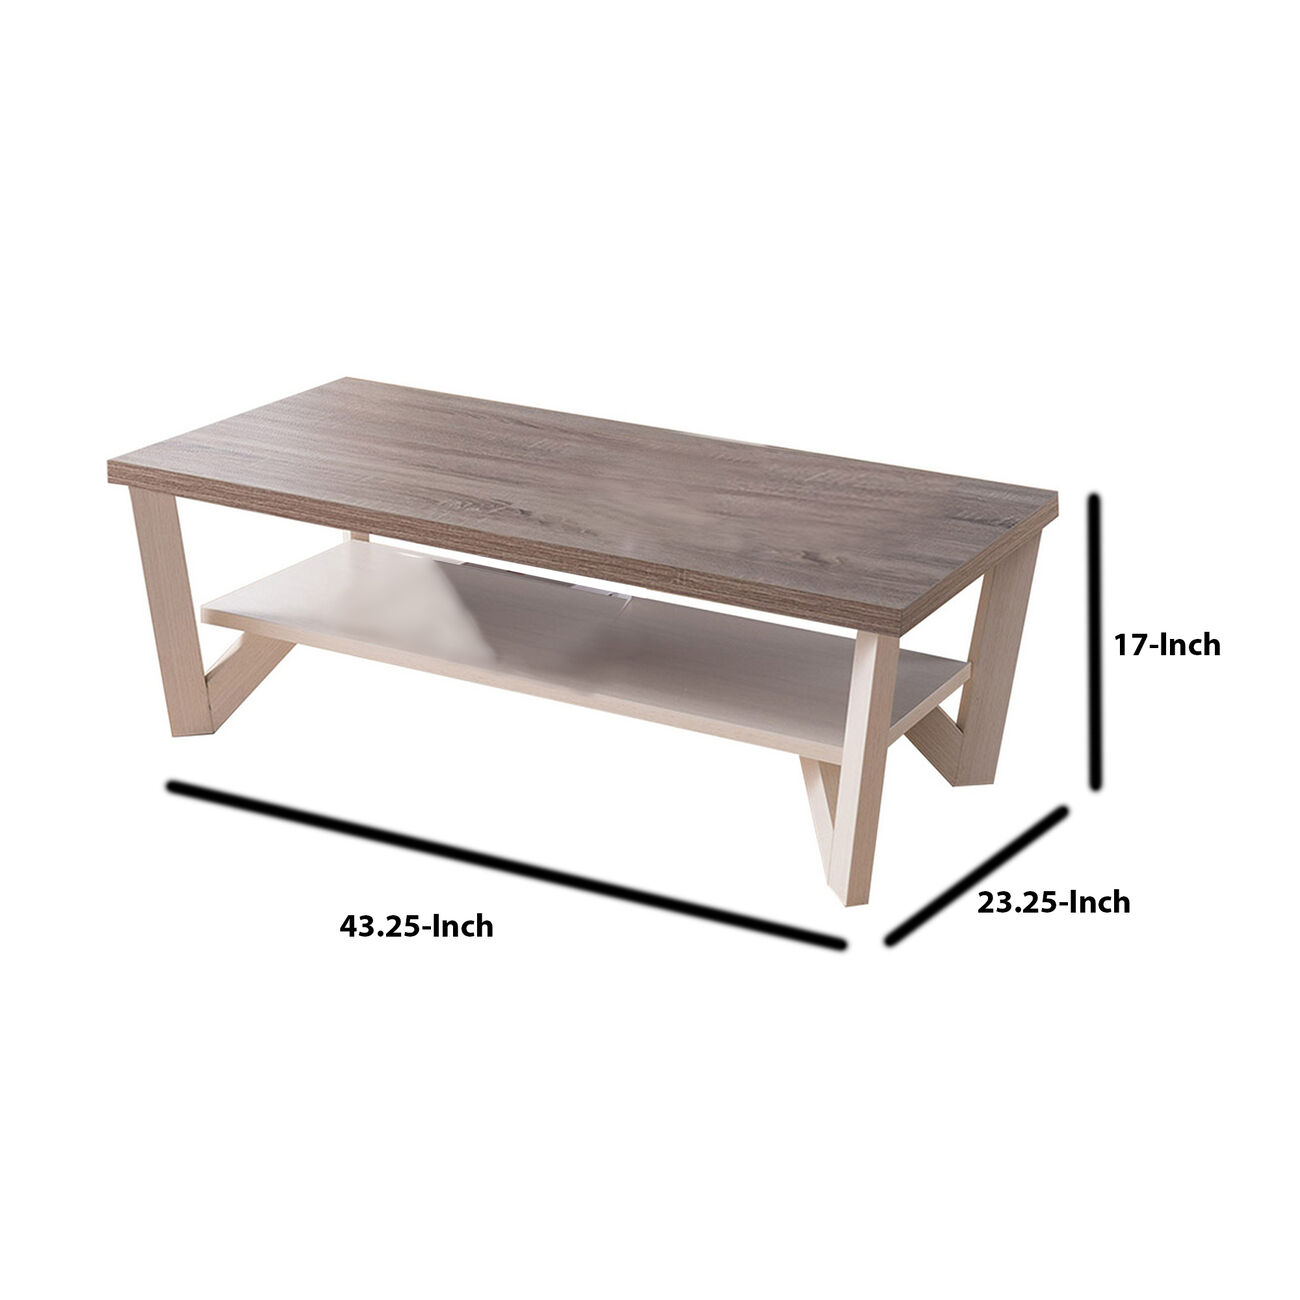 Stylish Center Display Coffee Table, Brown and White